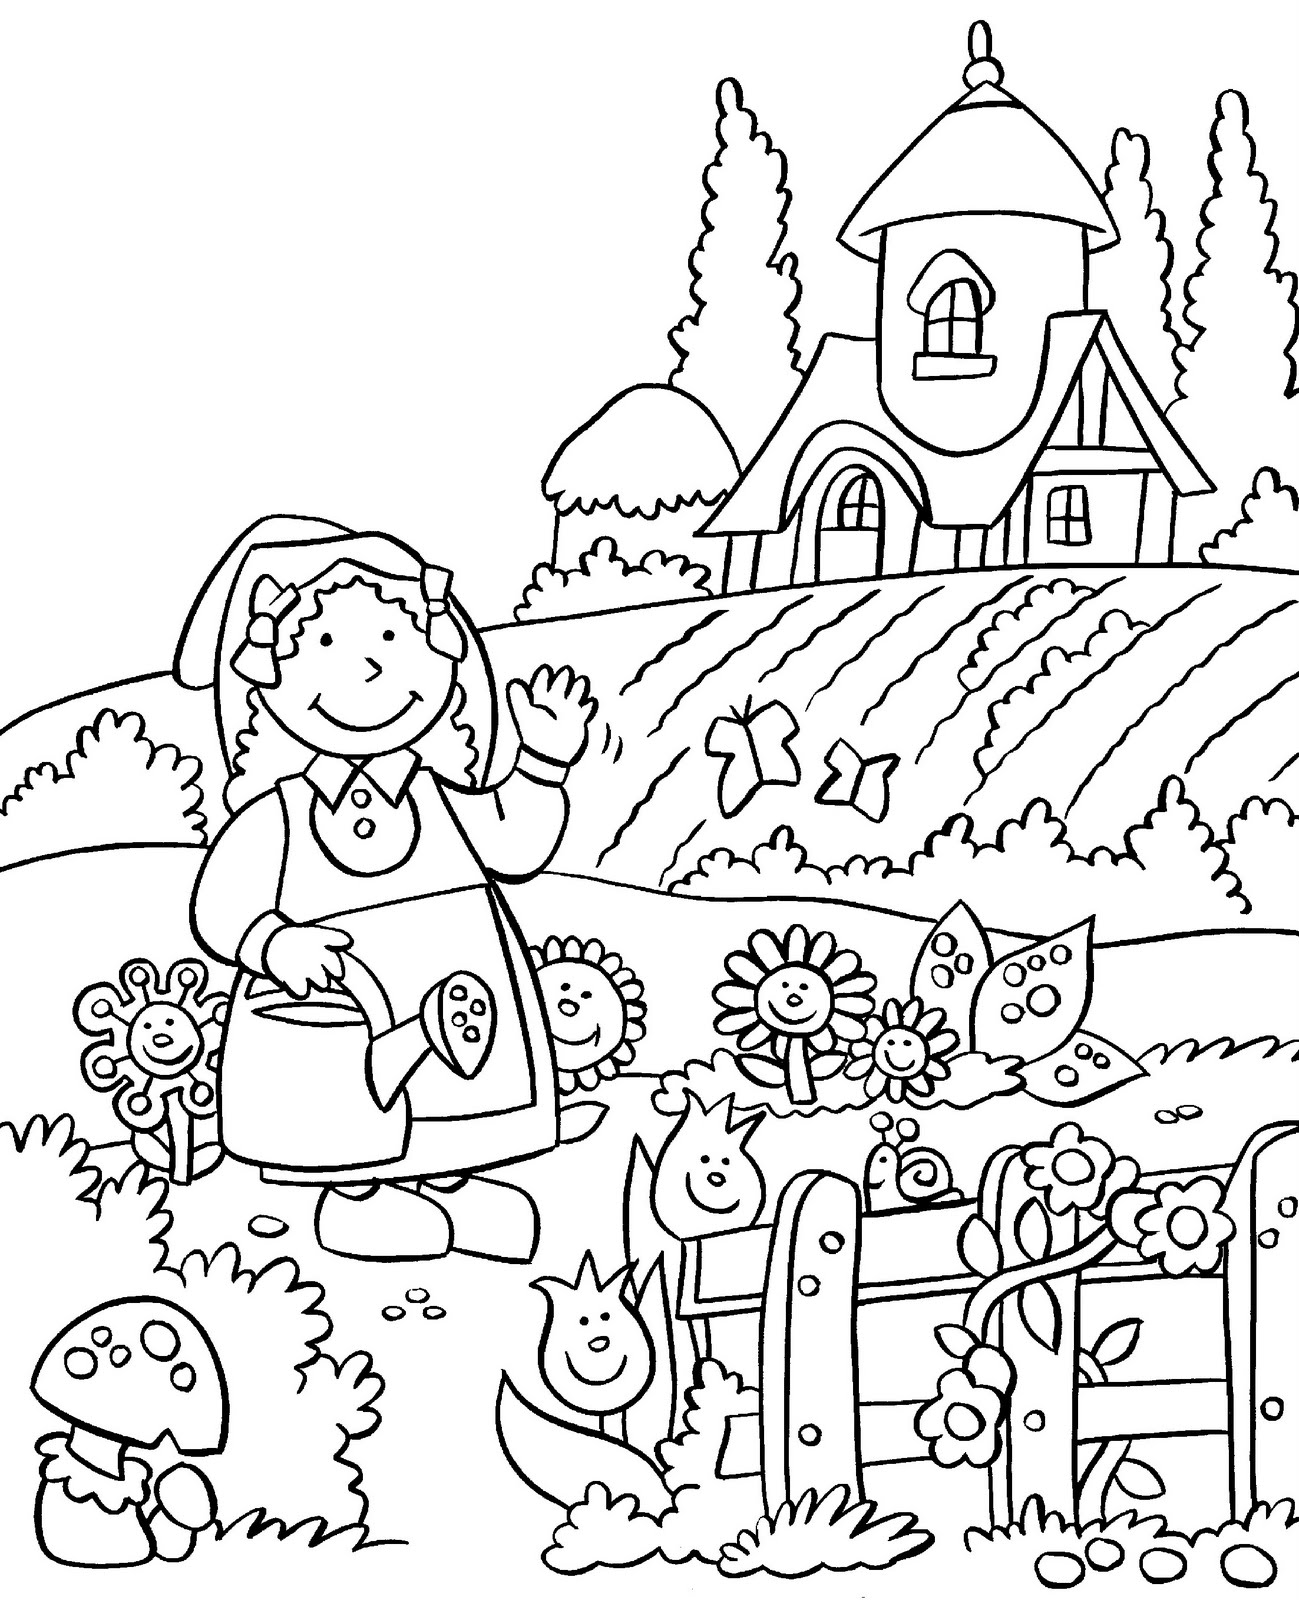 Coloring page: Garden (Nature) #166315 - Free Printable Coloring Pages